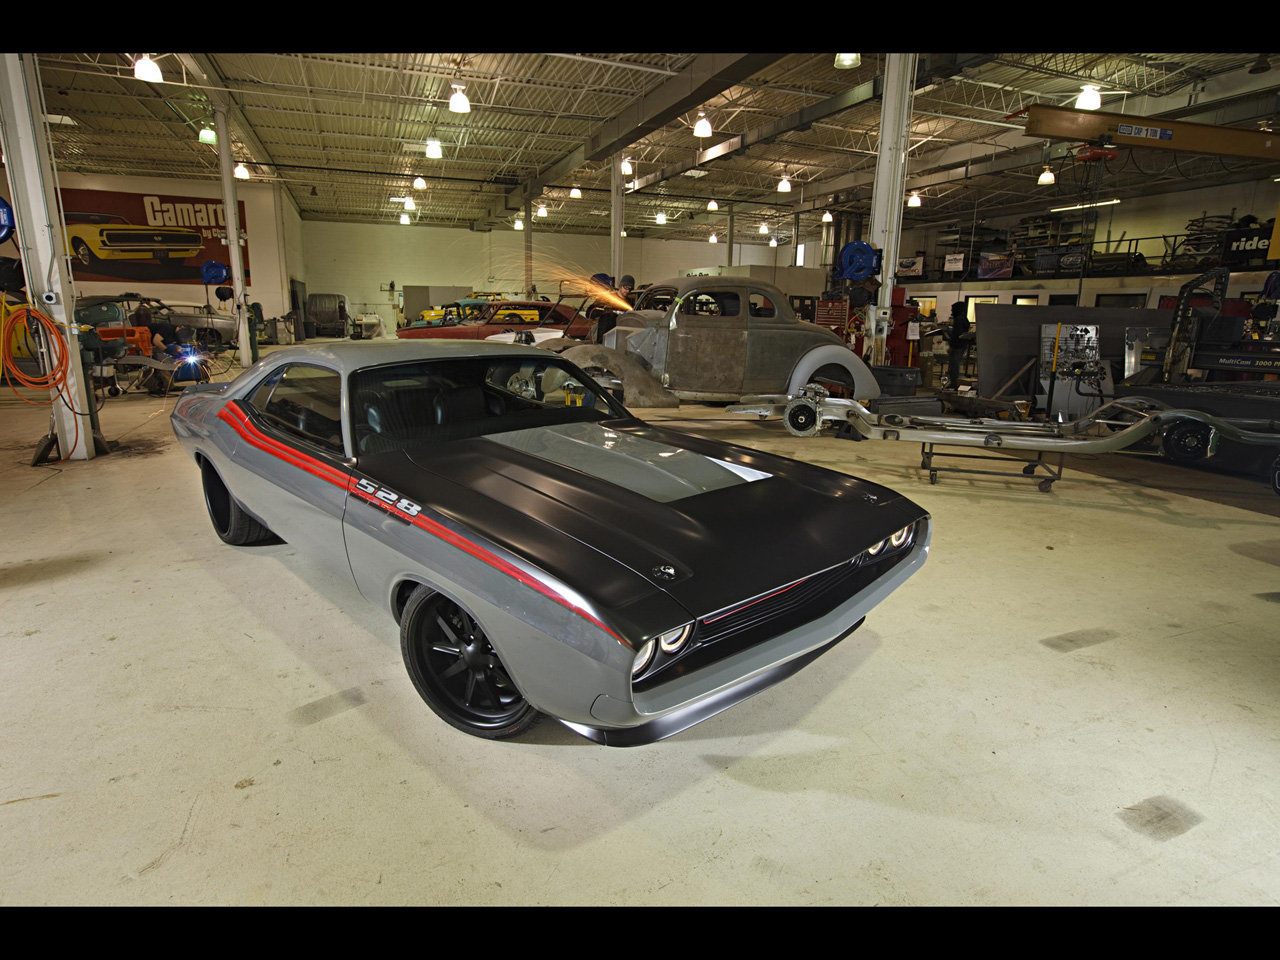 1970-Dodge-Challenger-by-Roadster-Shop-Front-Angle-1280x960.jpg